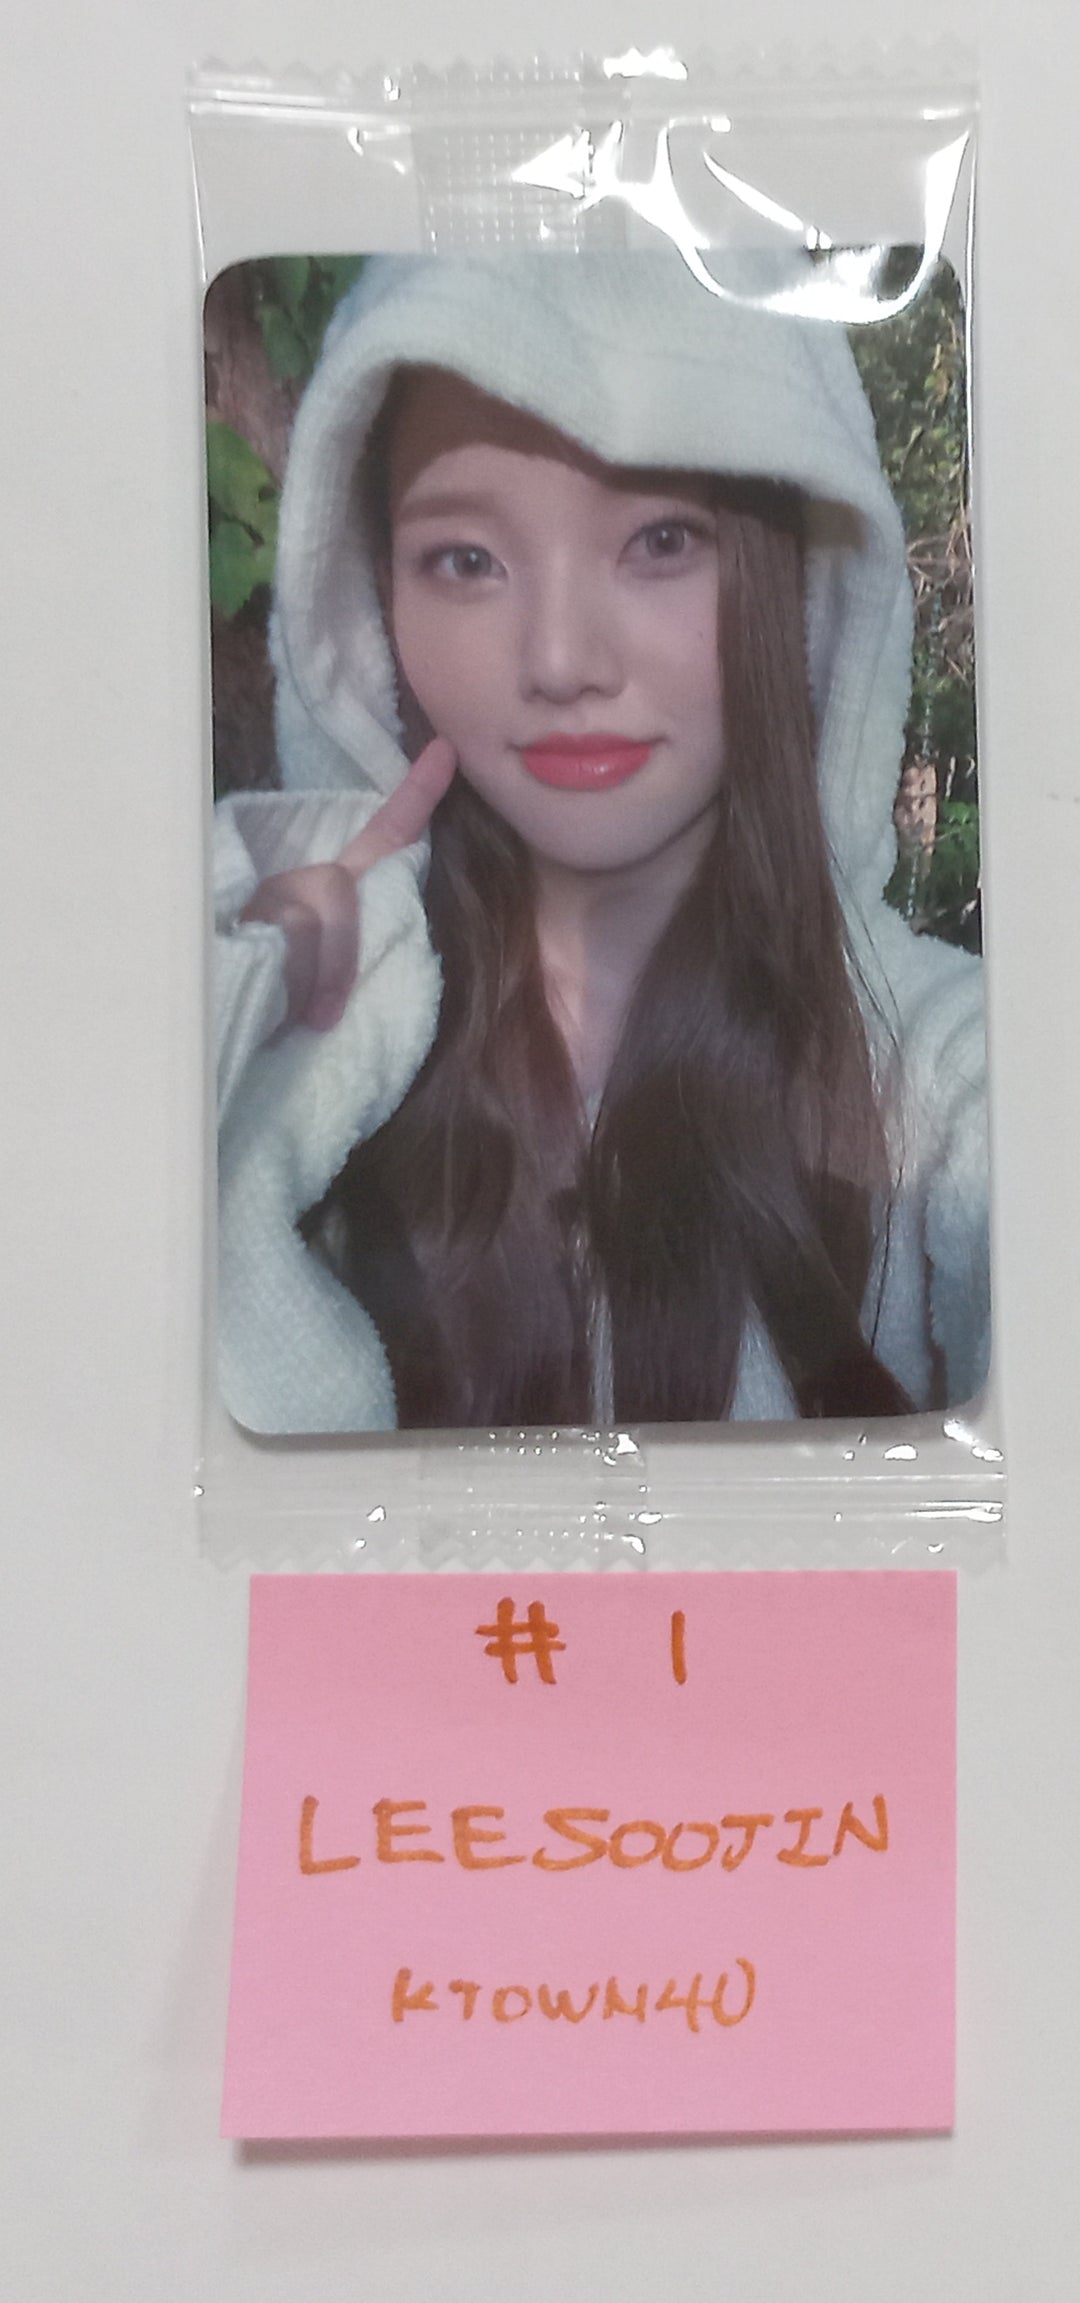 Weeekly "ColoRise" 5th Mini - Ktown4U Fansign Event Photocard [23.11.08]